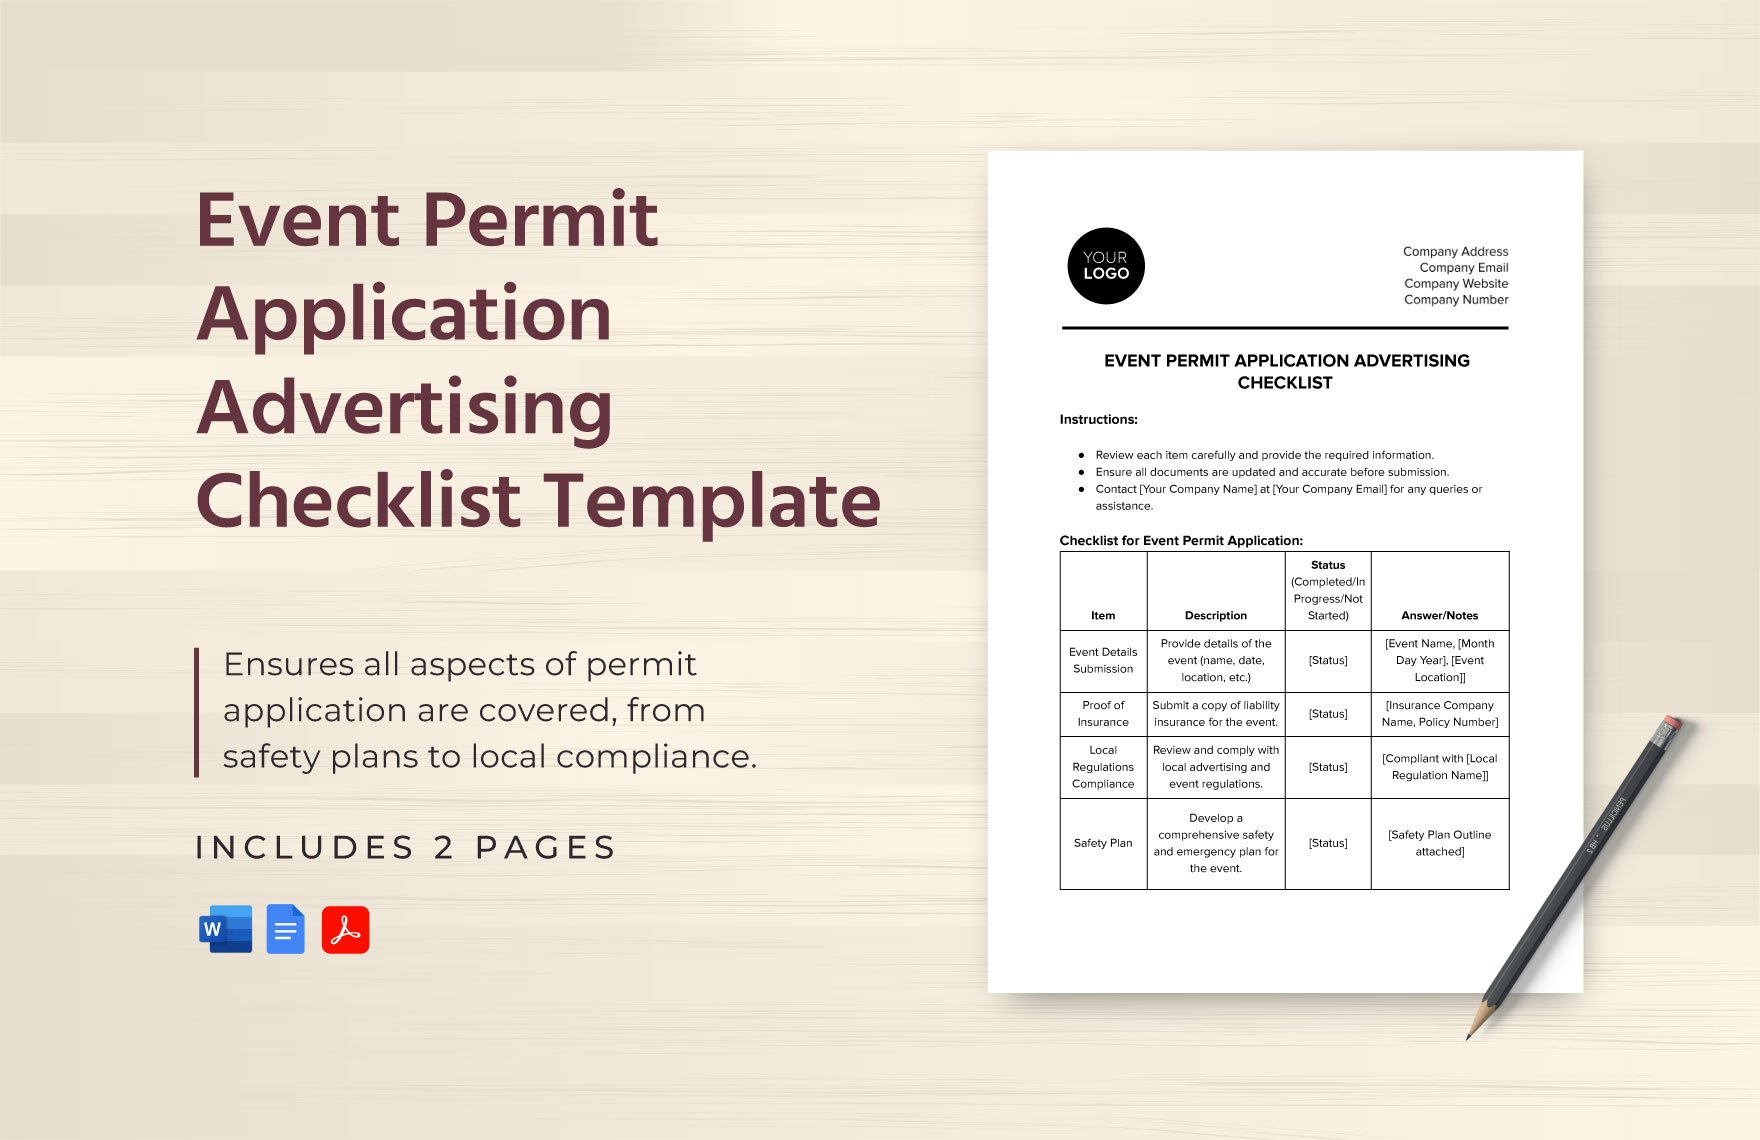 Event Permit Application Advertising Checklist Template in Word, Google Docs, PDF